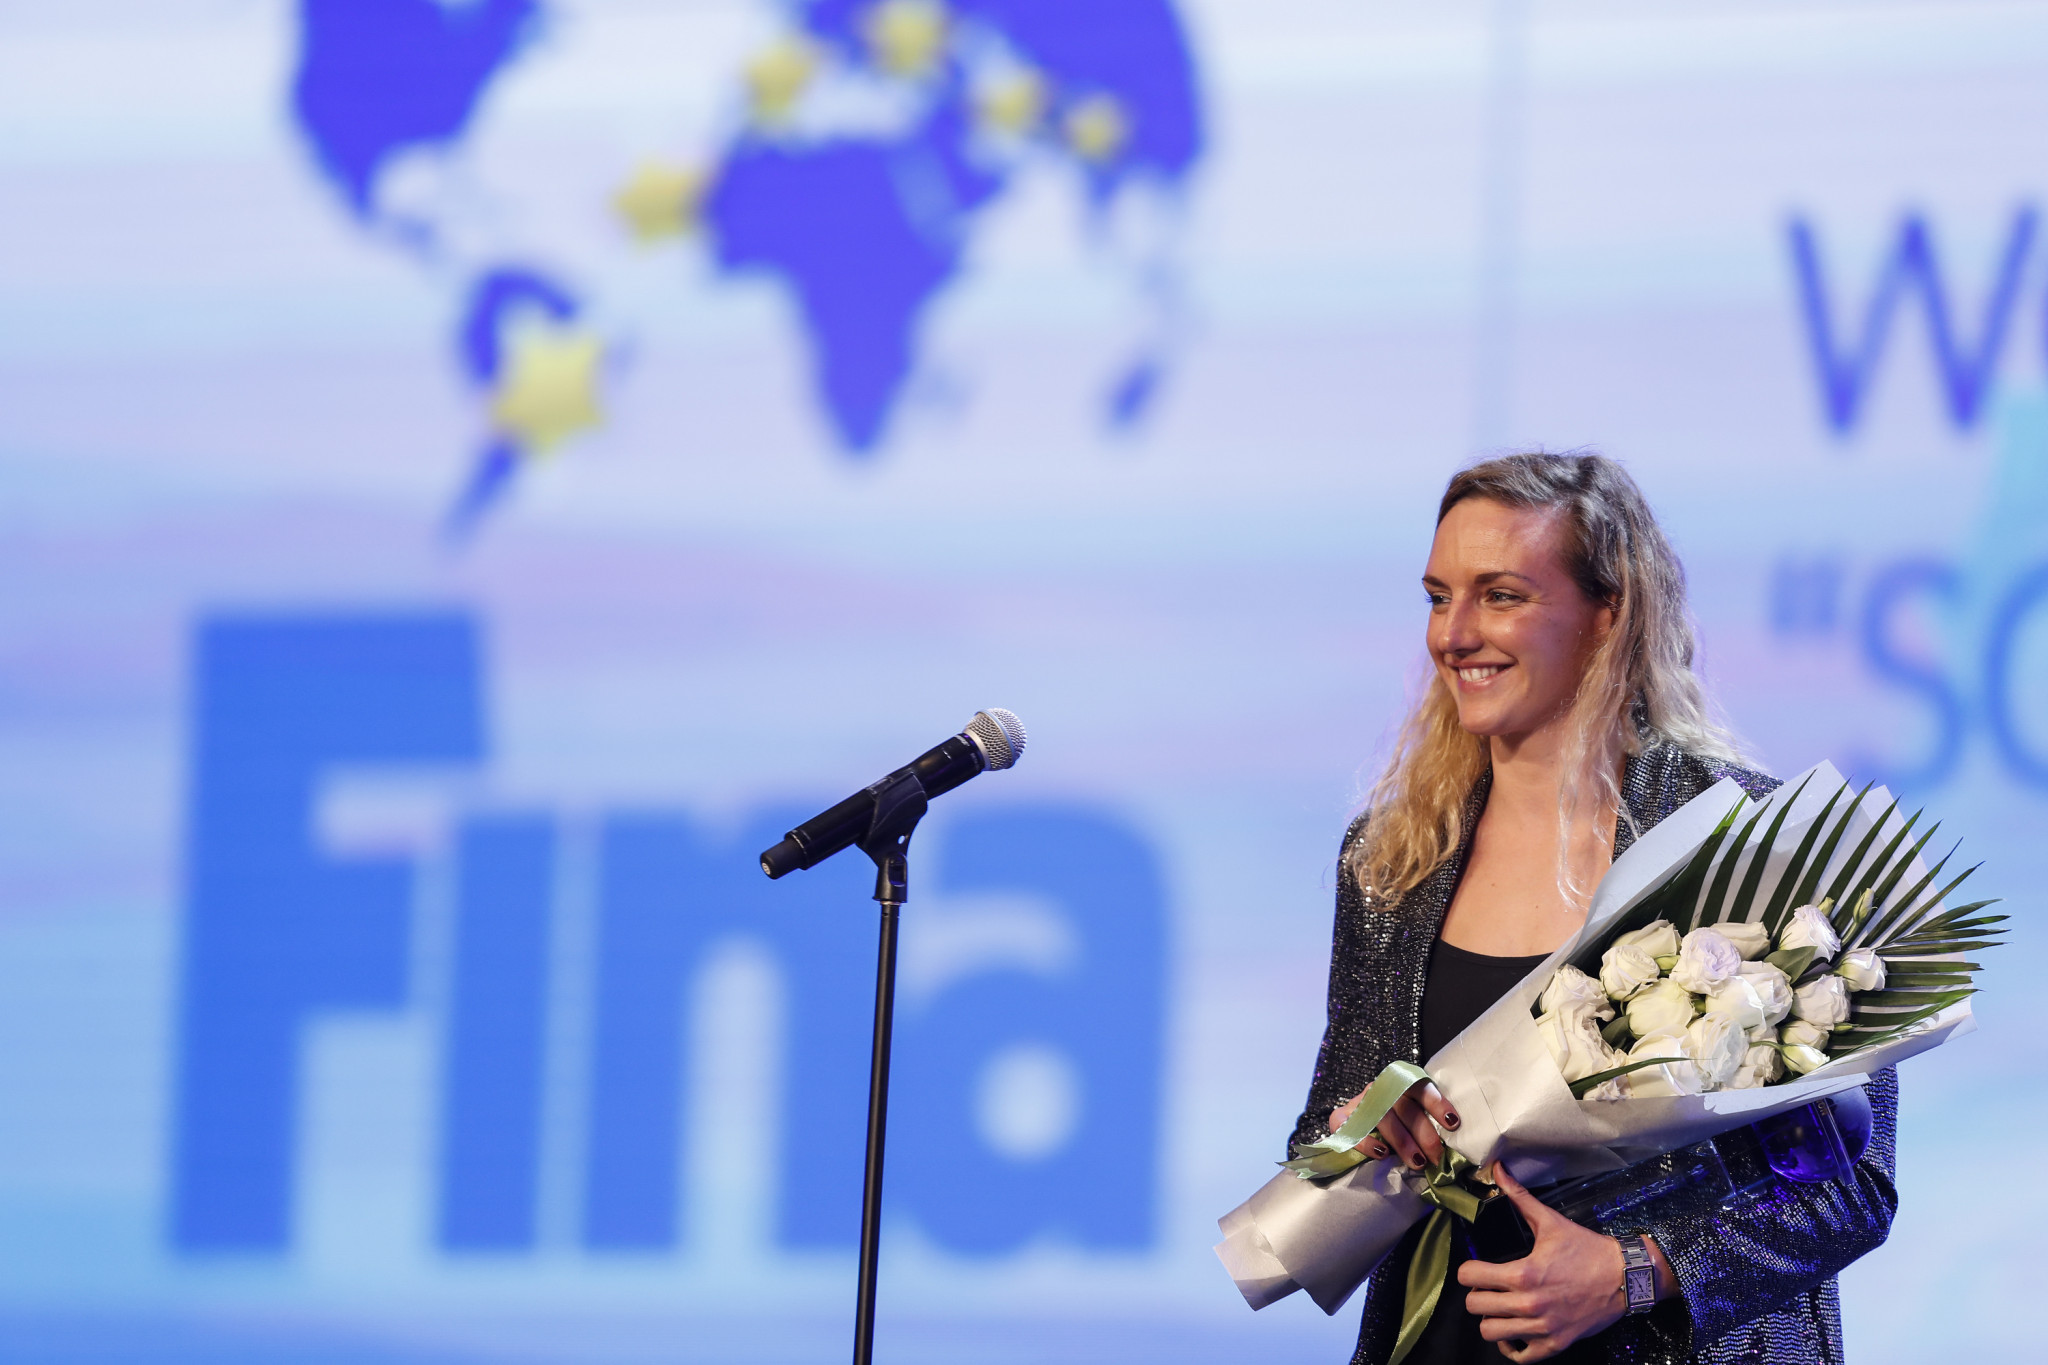 Hungary’s Katinka Hosszú  won the women's best swimmer prize at the FINA Best Swimmer Awards for 2018 ©Getty Images